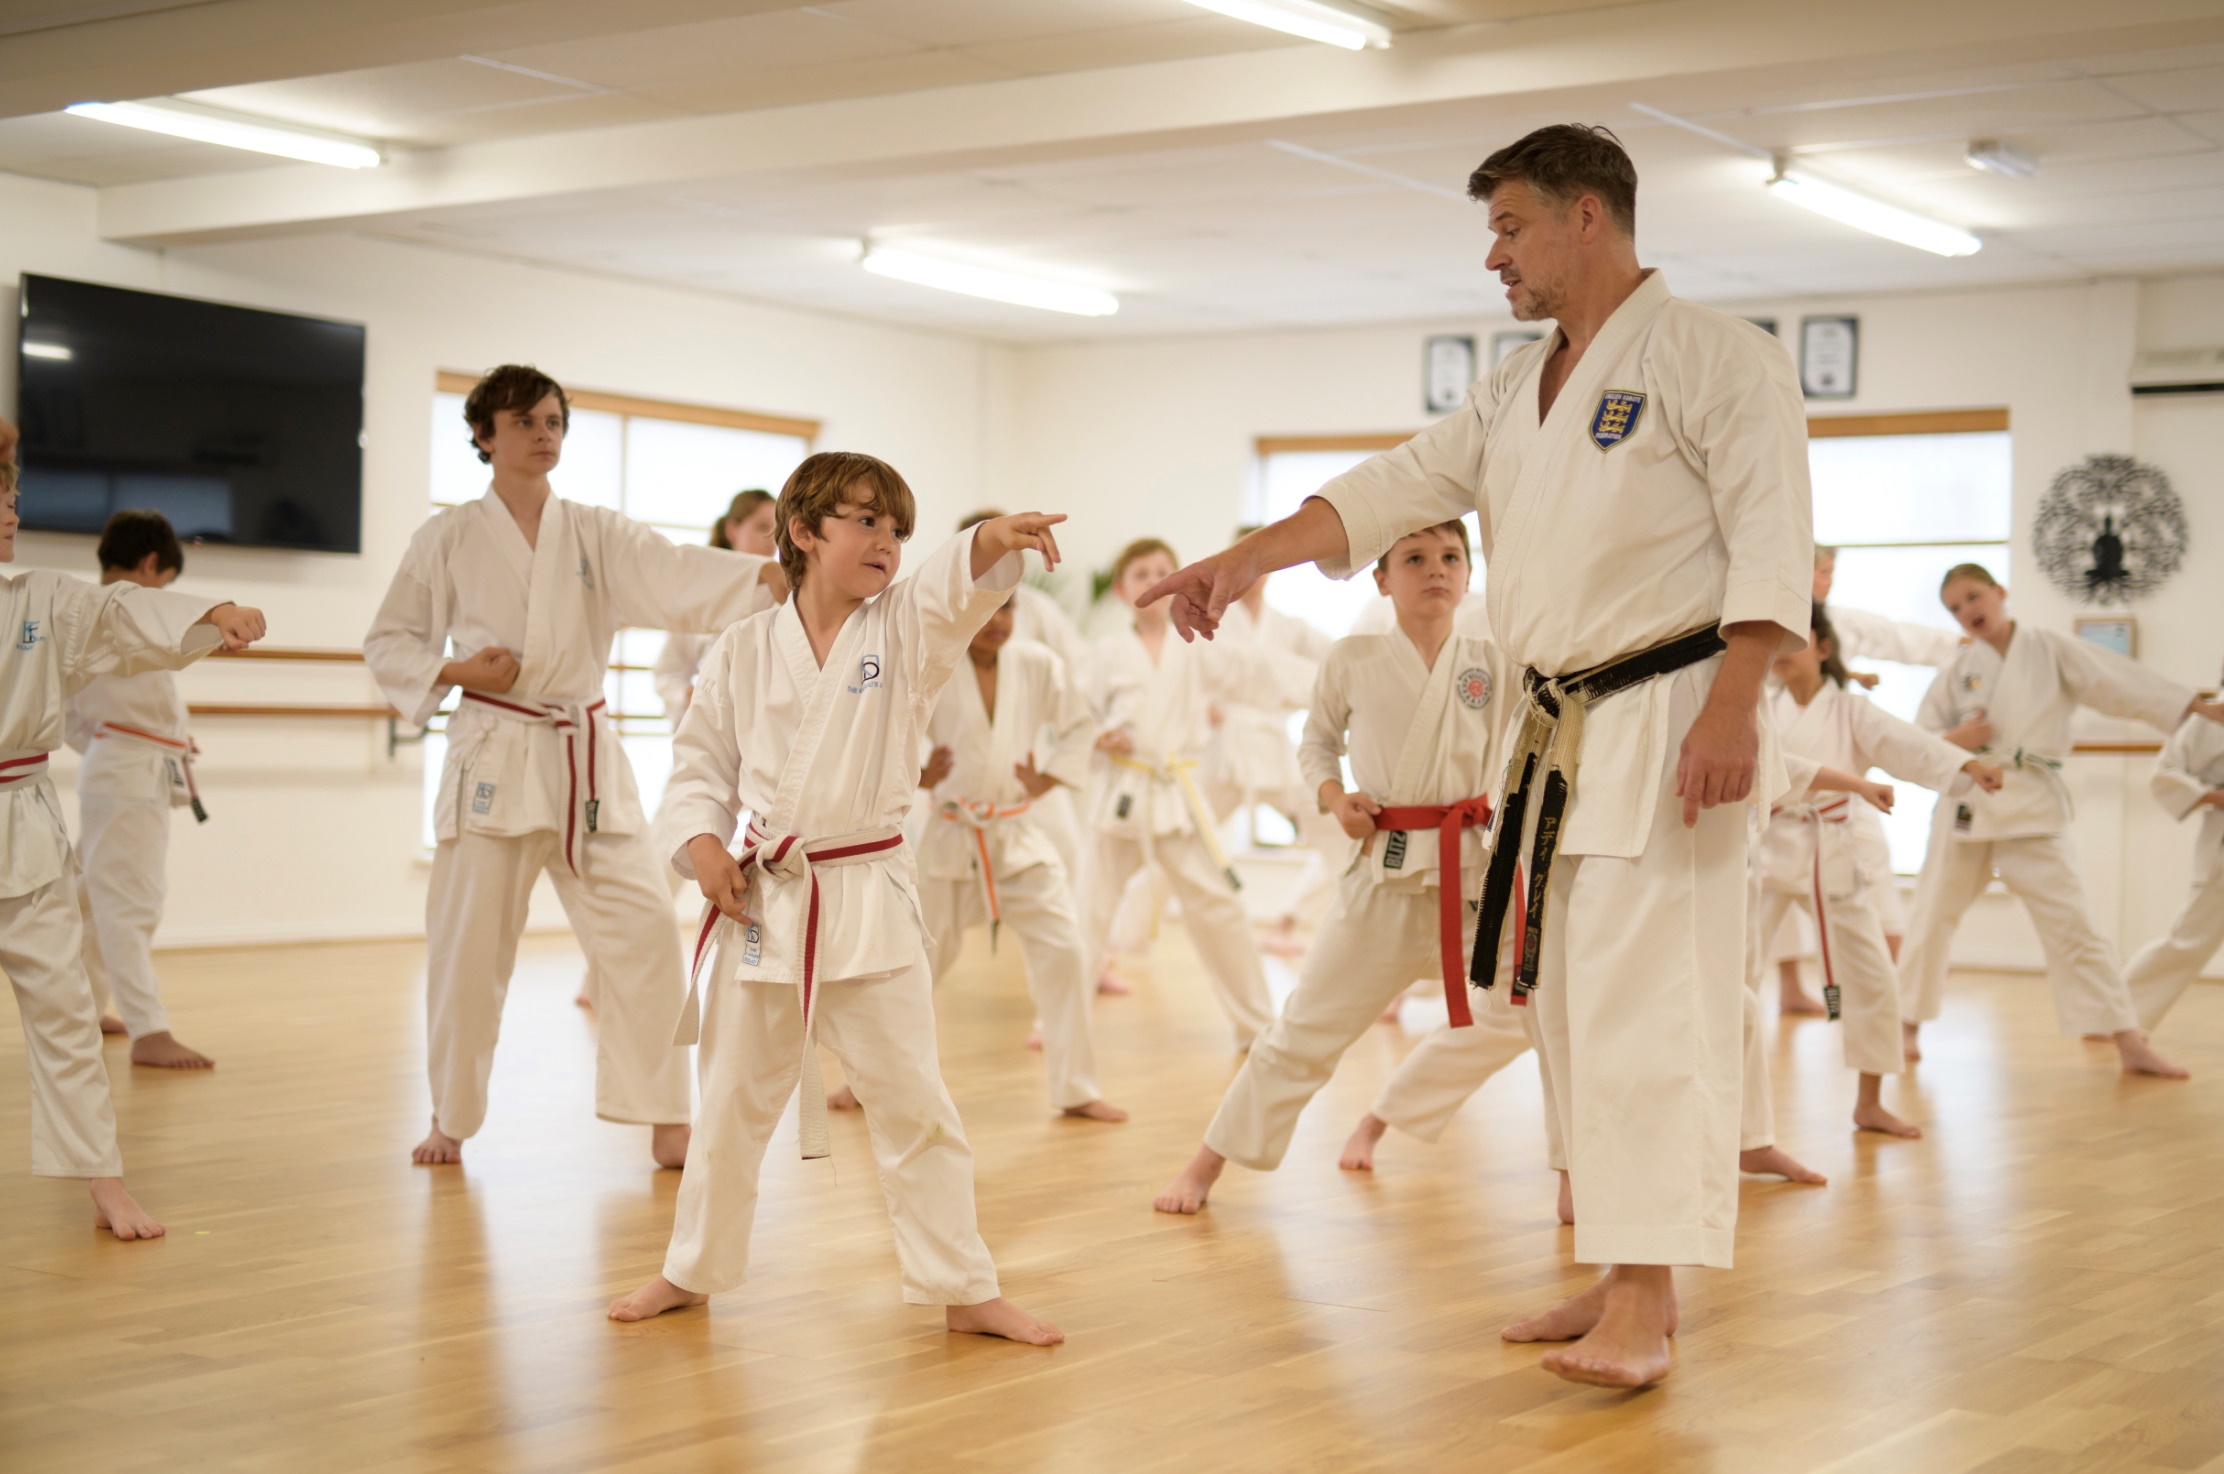 Karate coach walks in front of his students giving instructions during a drill